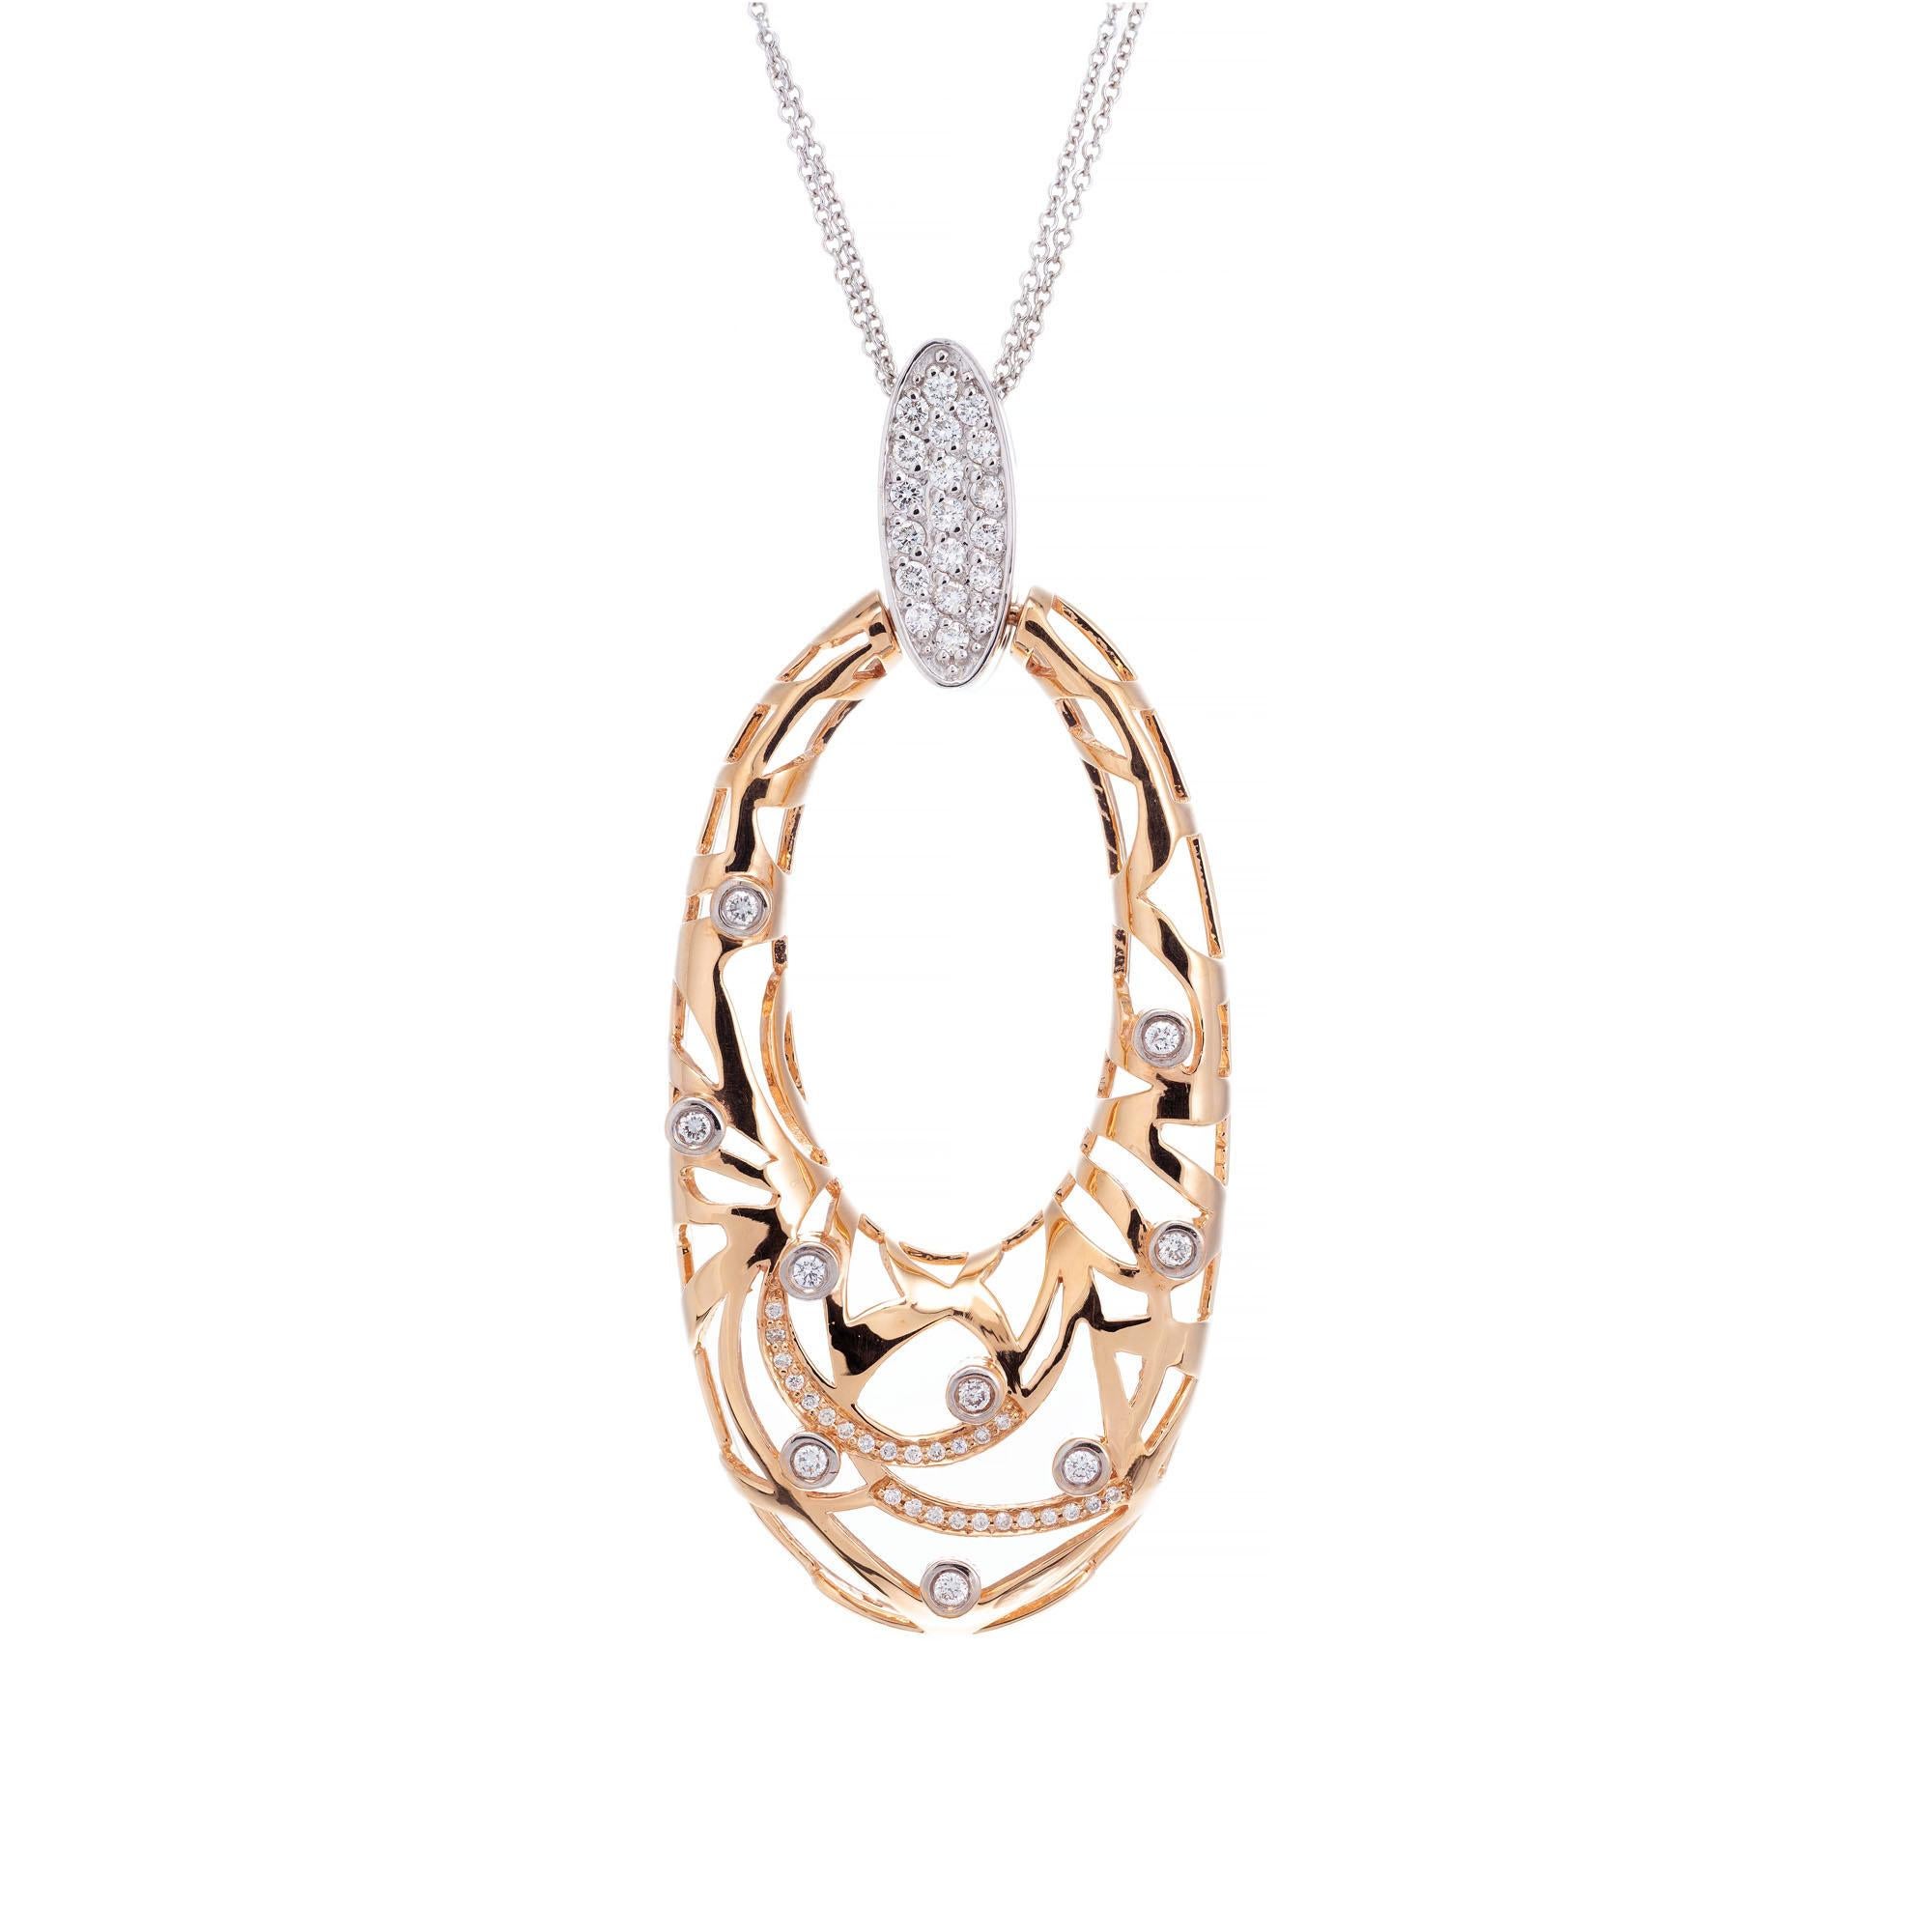 Rose gold open work elongated oval set with 53 full cut diamonds, white gold pave set bail and double white gold chain. Signed MS CO.

53 round diamonds¸ approx. total weight .90cts, G, VS1 – SI1
18k white and rose gold
Tested: 18k
Stamped: